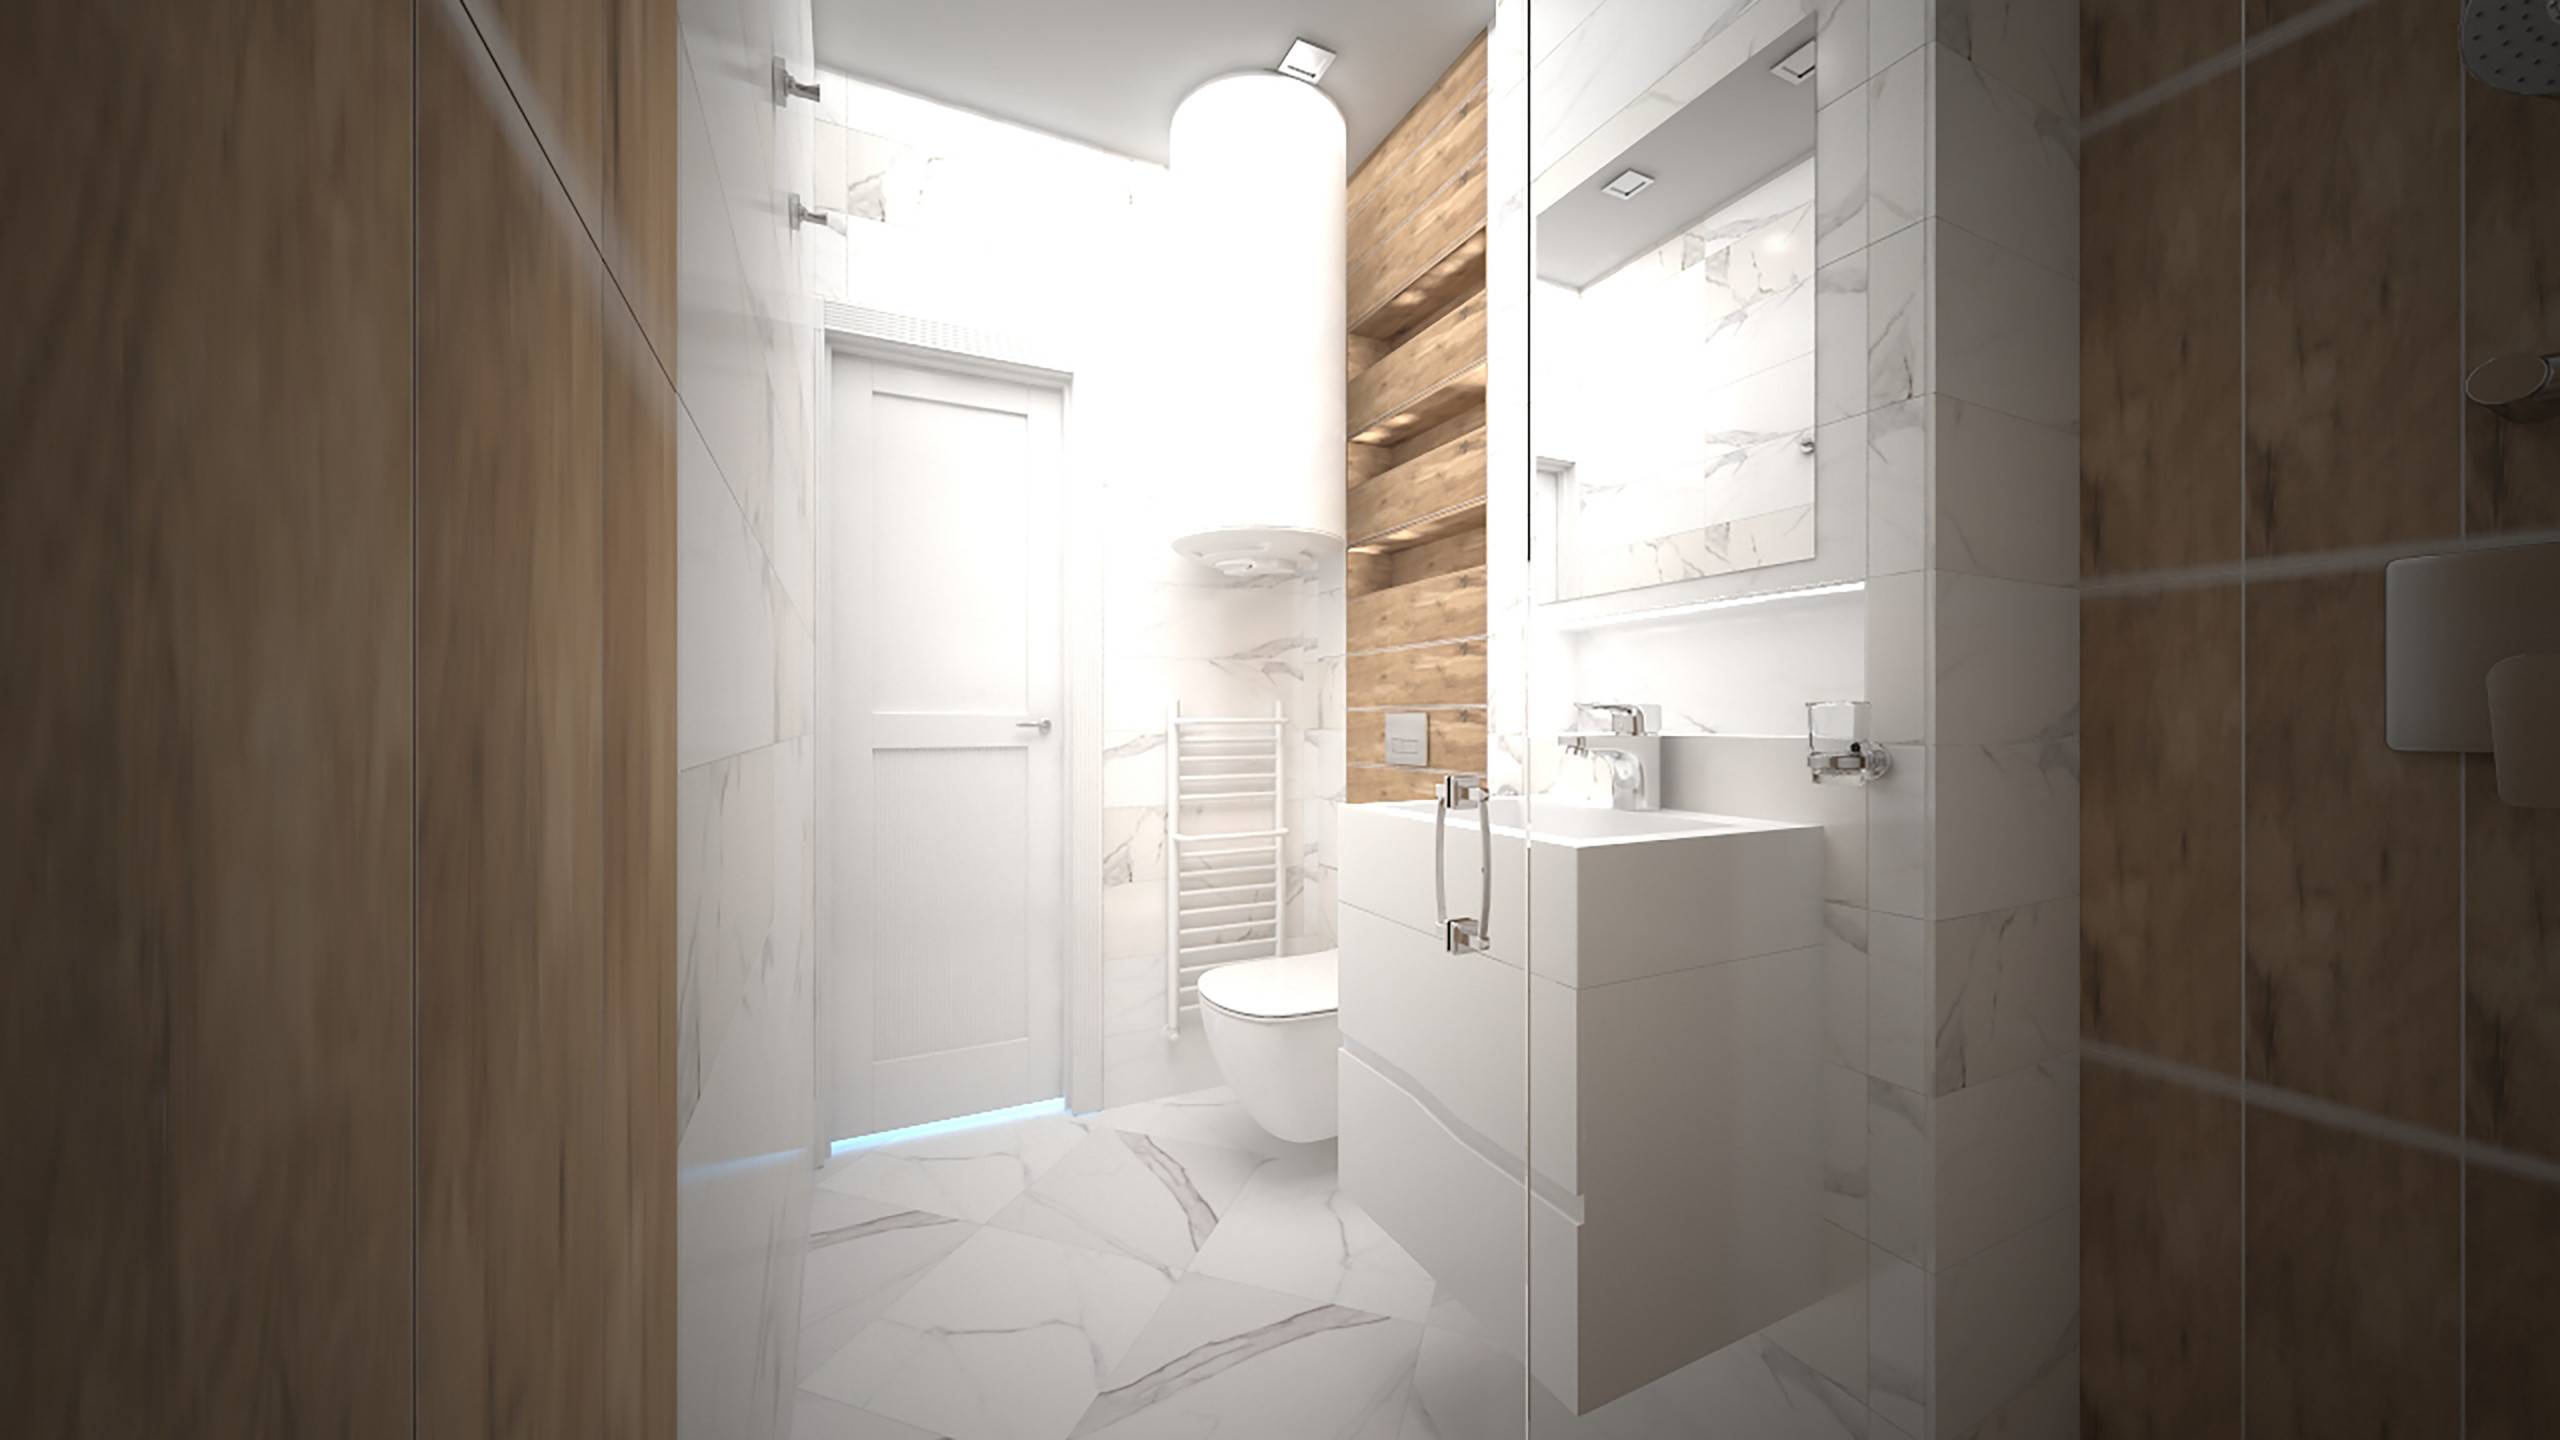 3D visualization of a bathroom